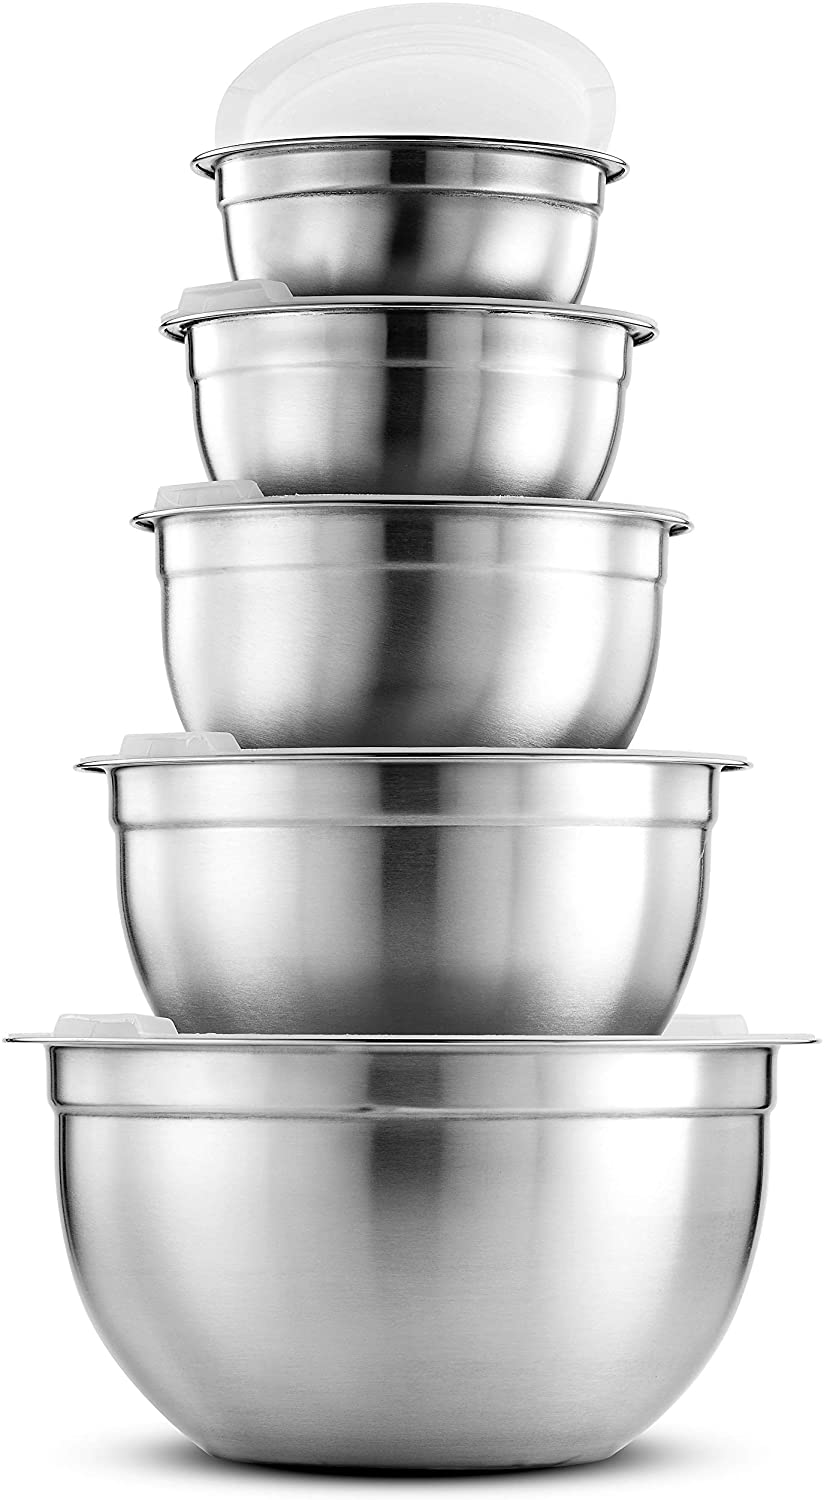 https://www.liabelle.me/wp-content/uploads/2020/06/FineDine-Premium-Stainless-Steel-Mixing-Bowls-with-Airtight-Lids-Set-of-5.jpg